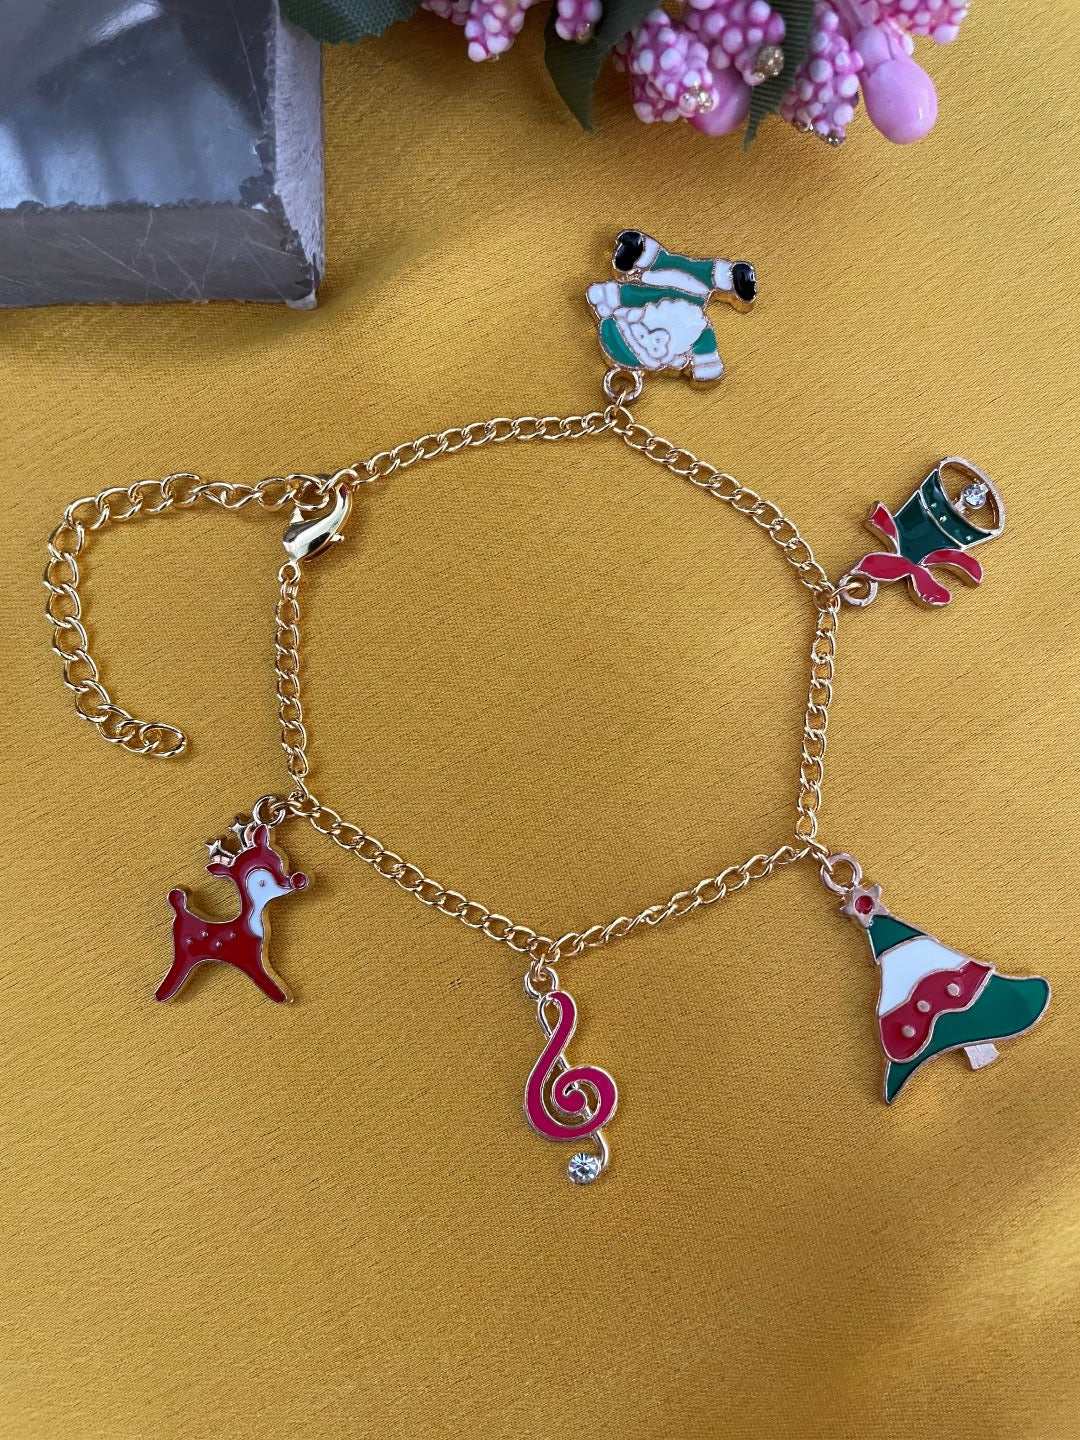 Christmas Gold Bracelet with Charms Snowman,Bells,Christmas Tree,Musical Notes ,Raindeer